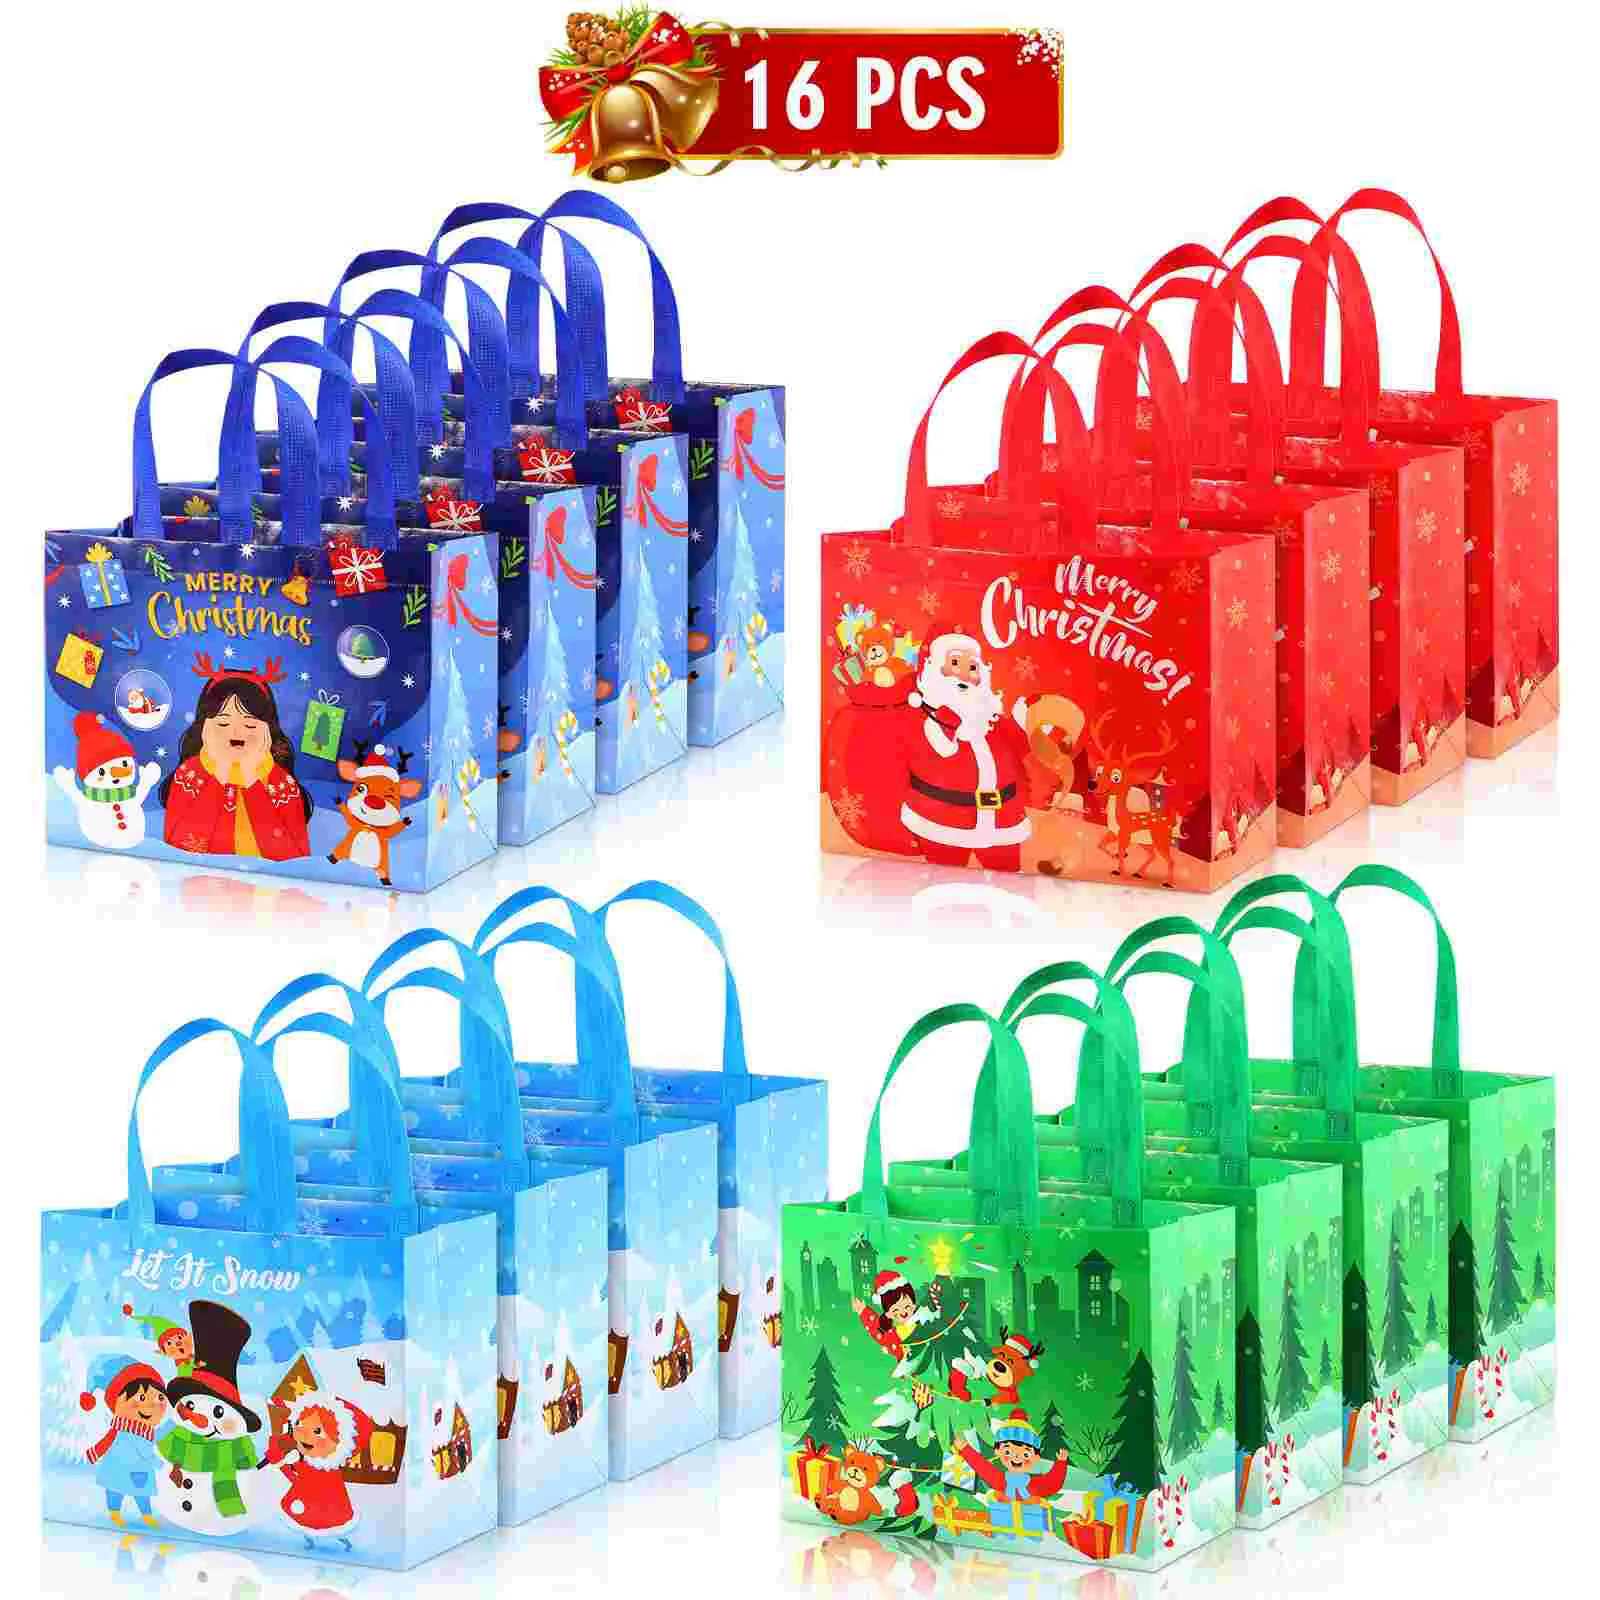 

Hemoton 16pcs Christmas Handy Gift Bags Festive Goody Bags Xmas Wrapping Bags Presents Candies Storage Pouches Party Favors